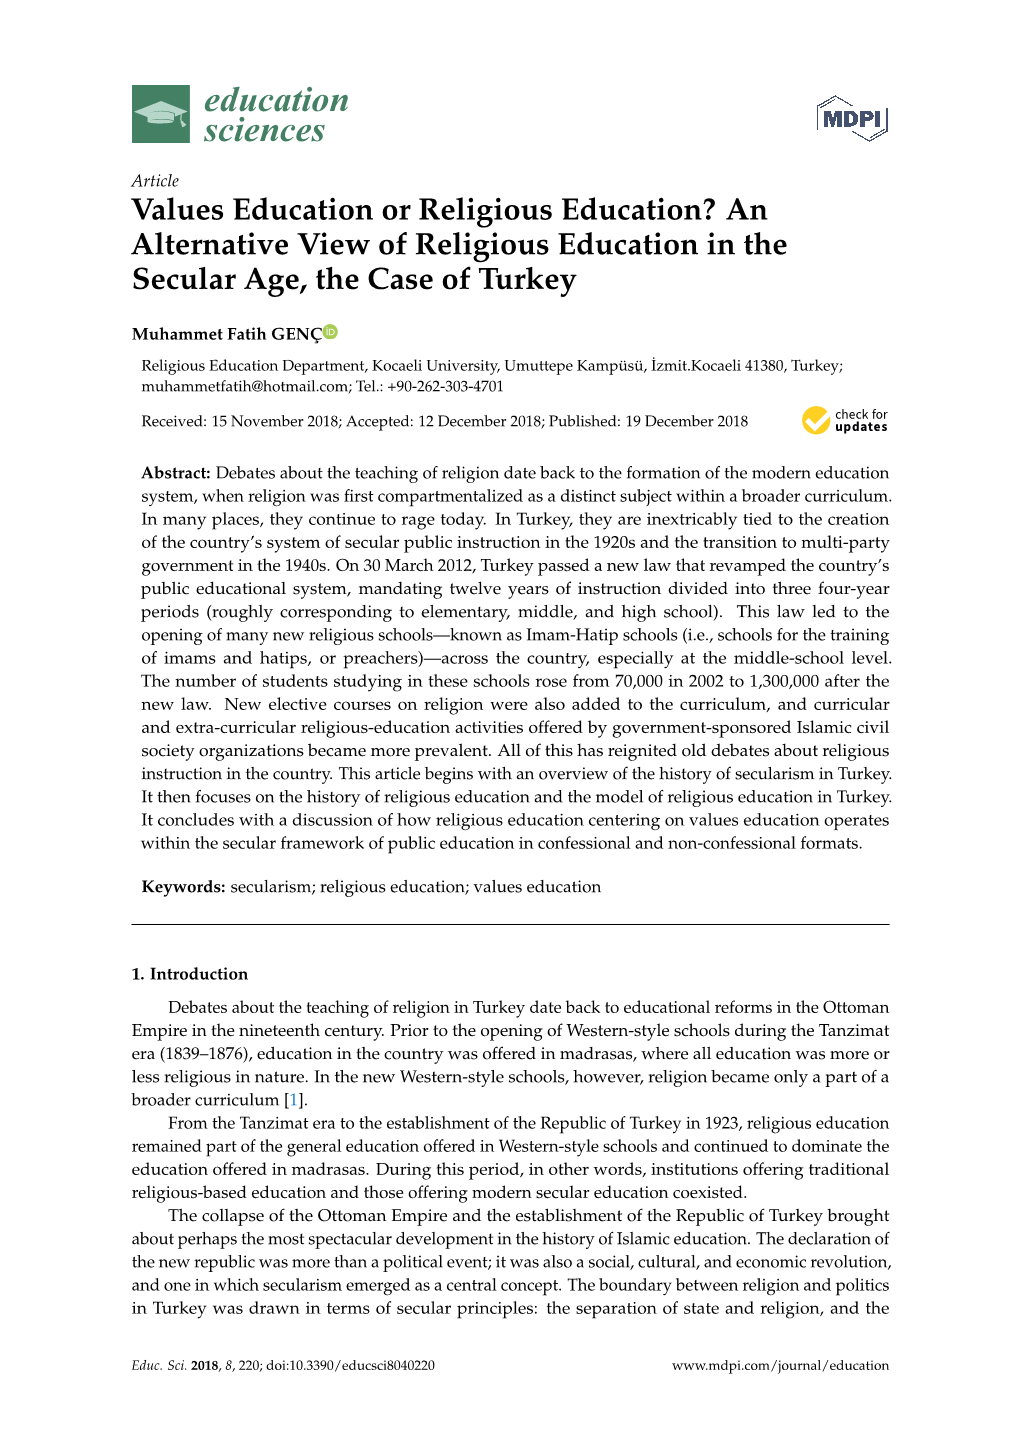 An Alternative View of Religious Education in the Secular Age, the Case of Turkey